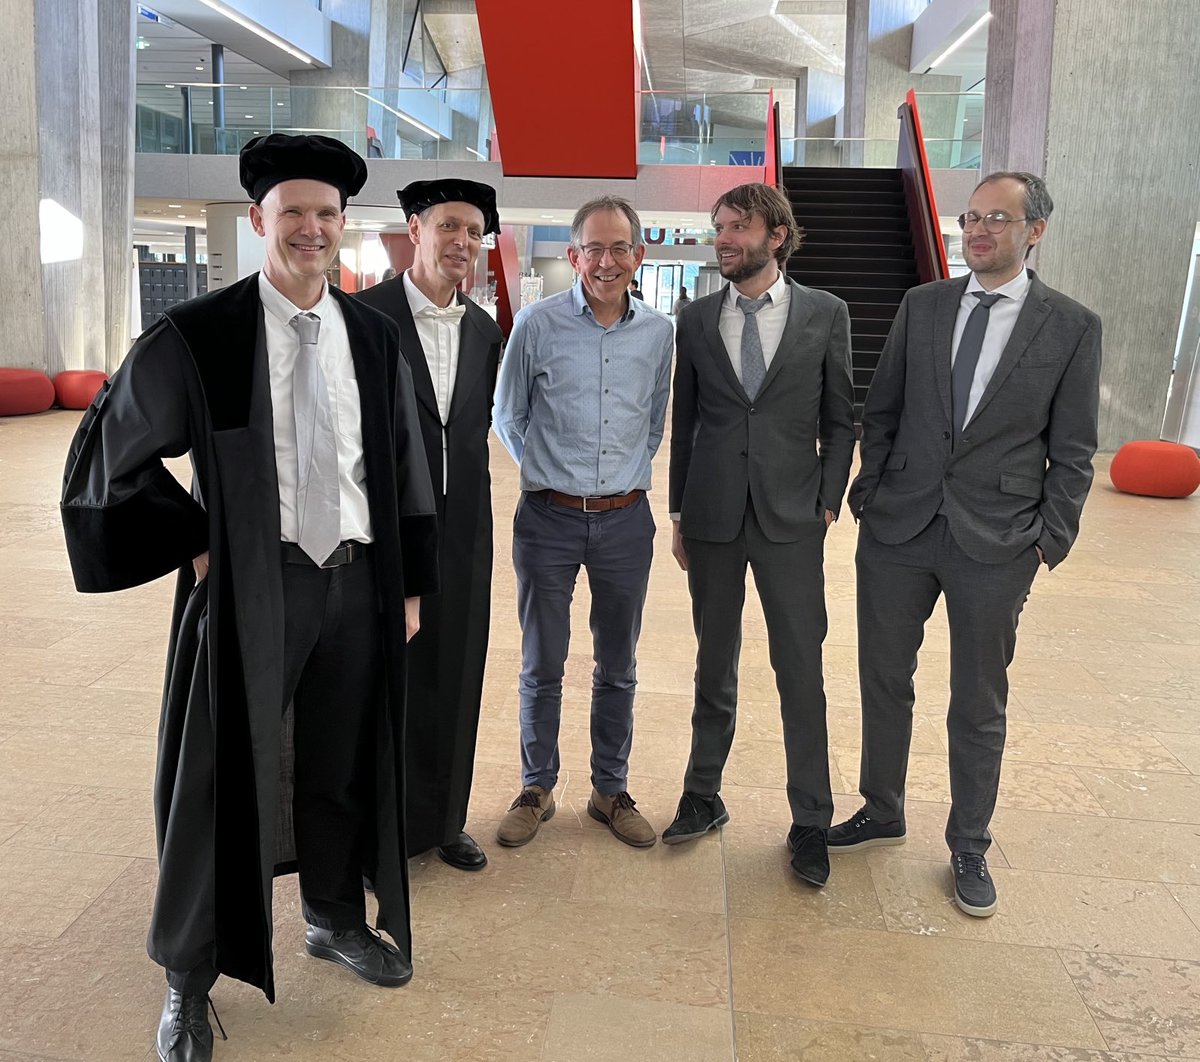 Just finished a great PhD viva from Imke in Eindhoven. Now out to celebrate all our hard work. ⁦@yvdburgt⁩ just announced that we need to make this a memorable night. Any FOMO ⁦@santorof14⁩ ??